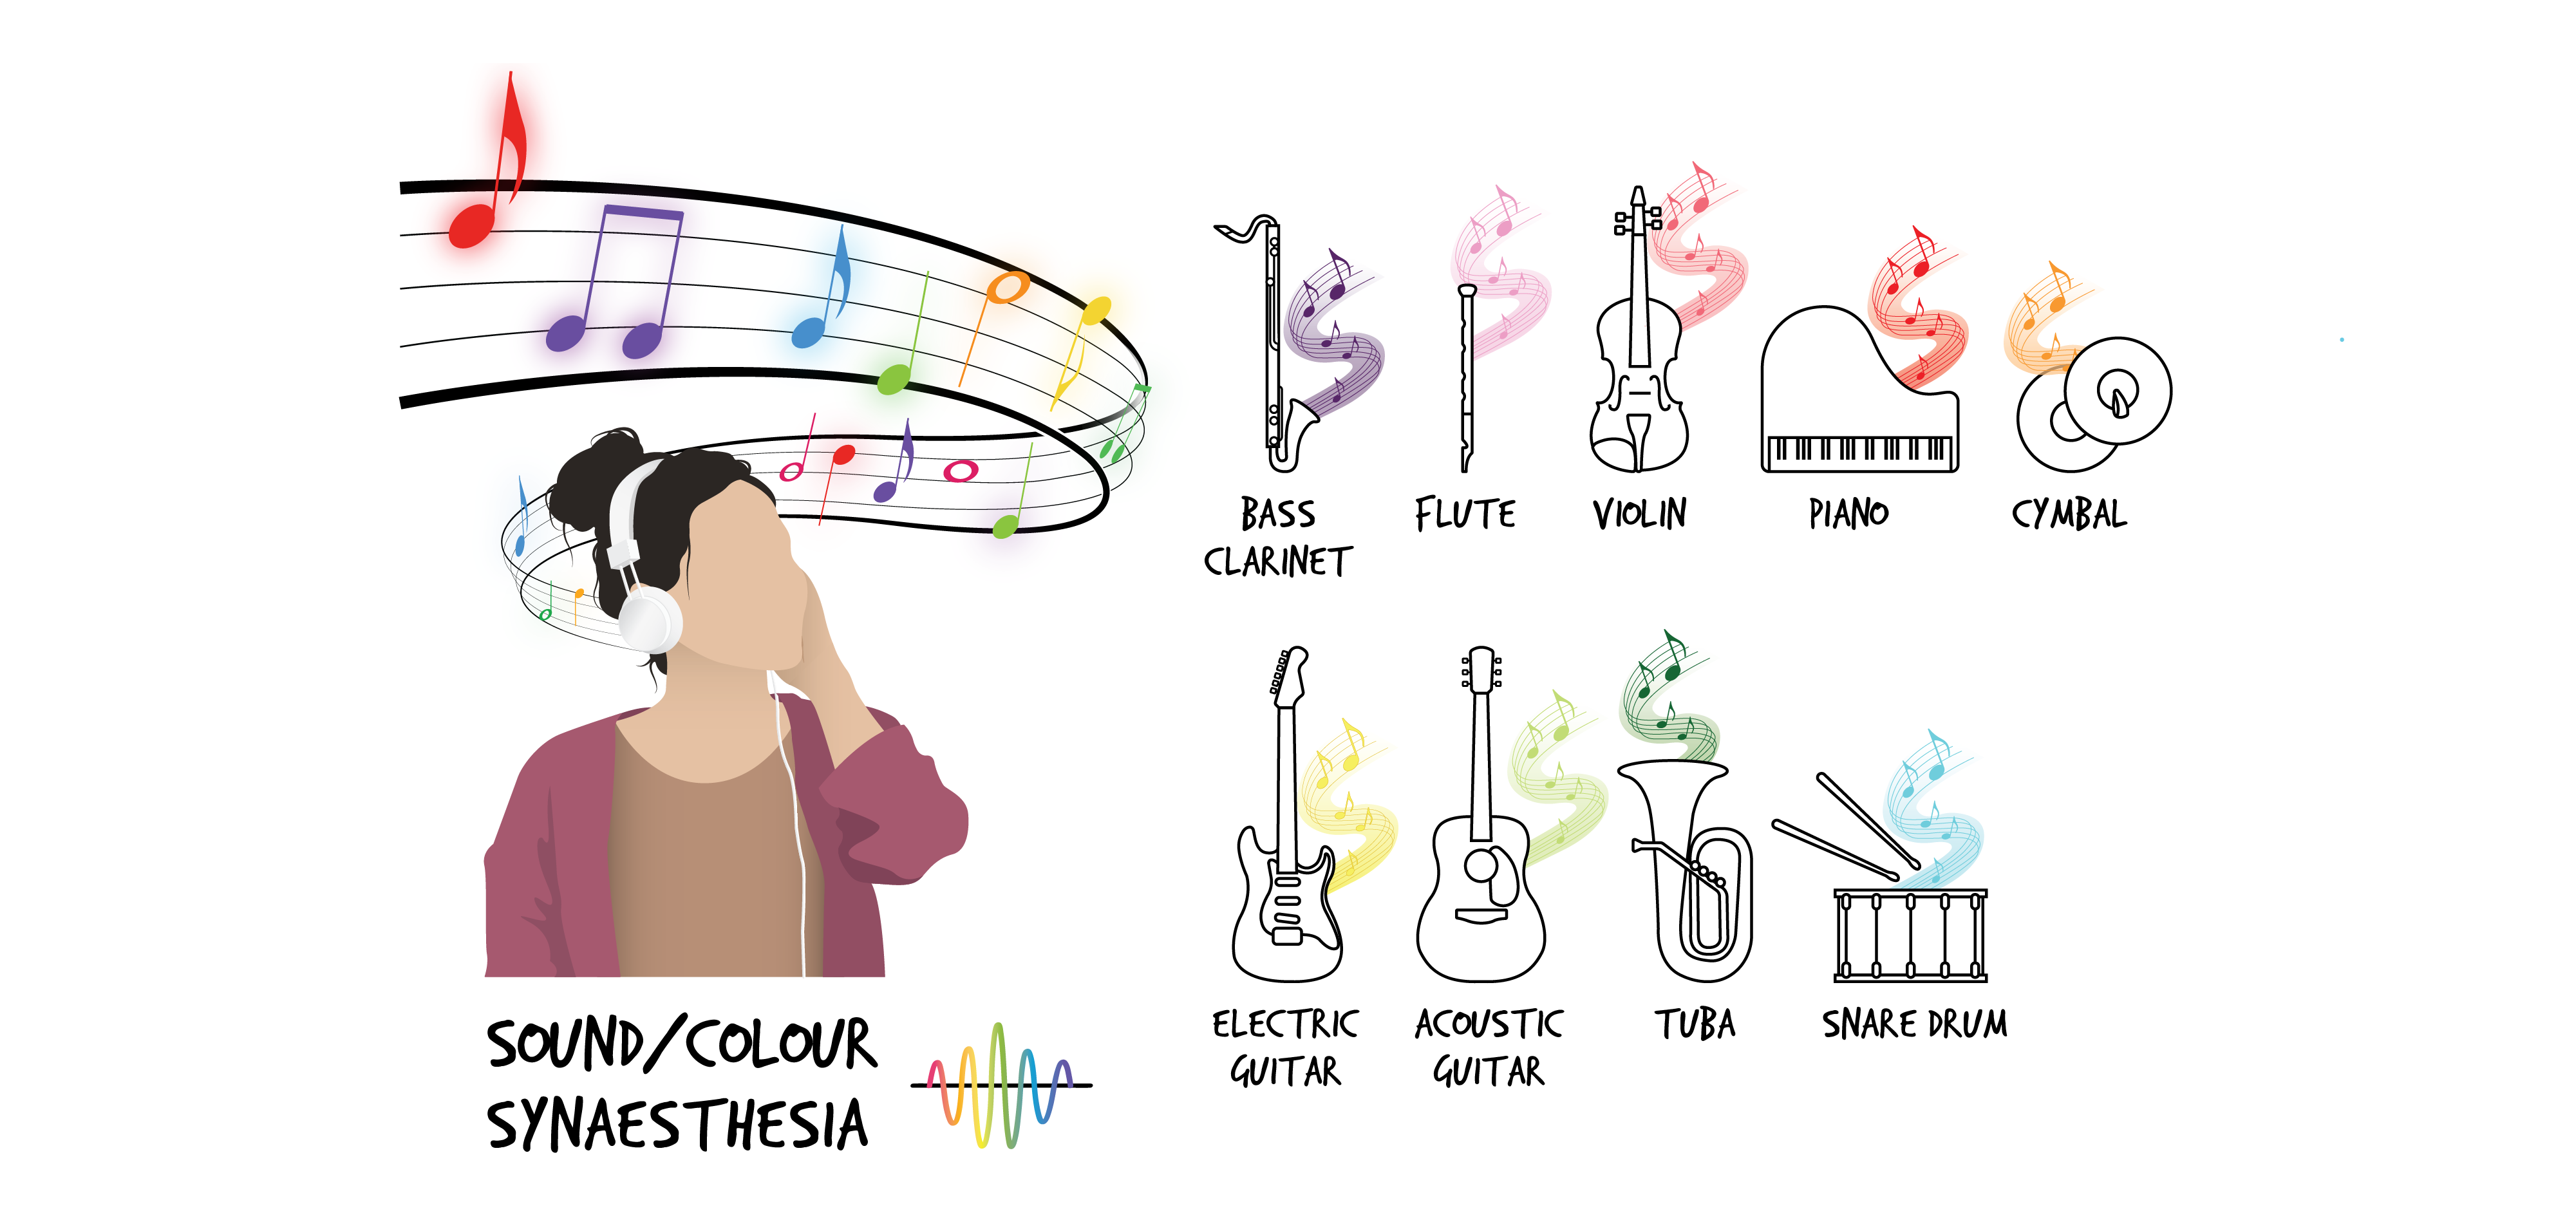 A person with white headphones on wears a brown shirt and a purple sweater. Coming out of headphones is a curved musical staff with red, purple, blue, green, orange, and yellow musical notes. Below the person is the text Sound/Colour Synaesthesia with a rainbow sound wave beside it.